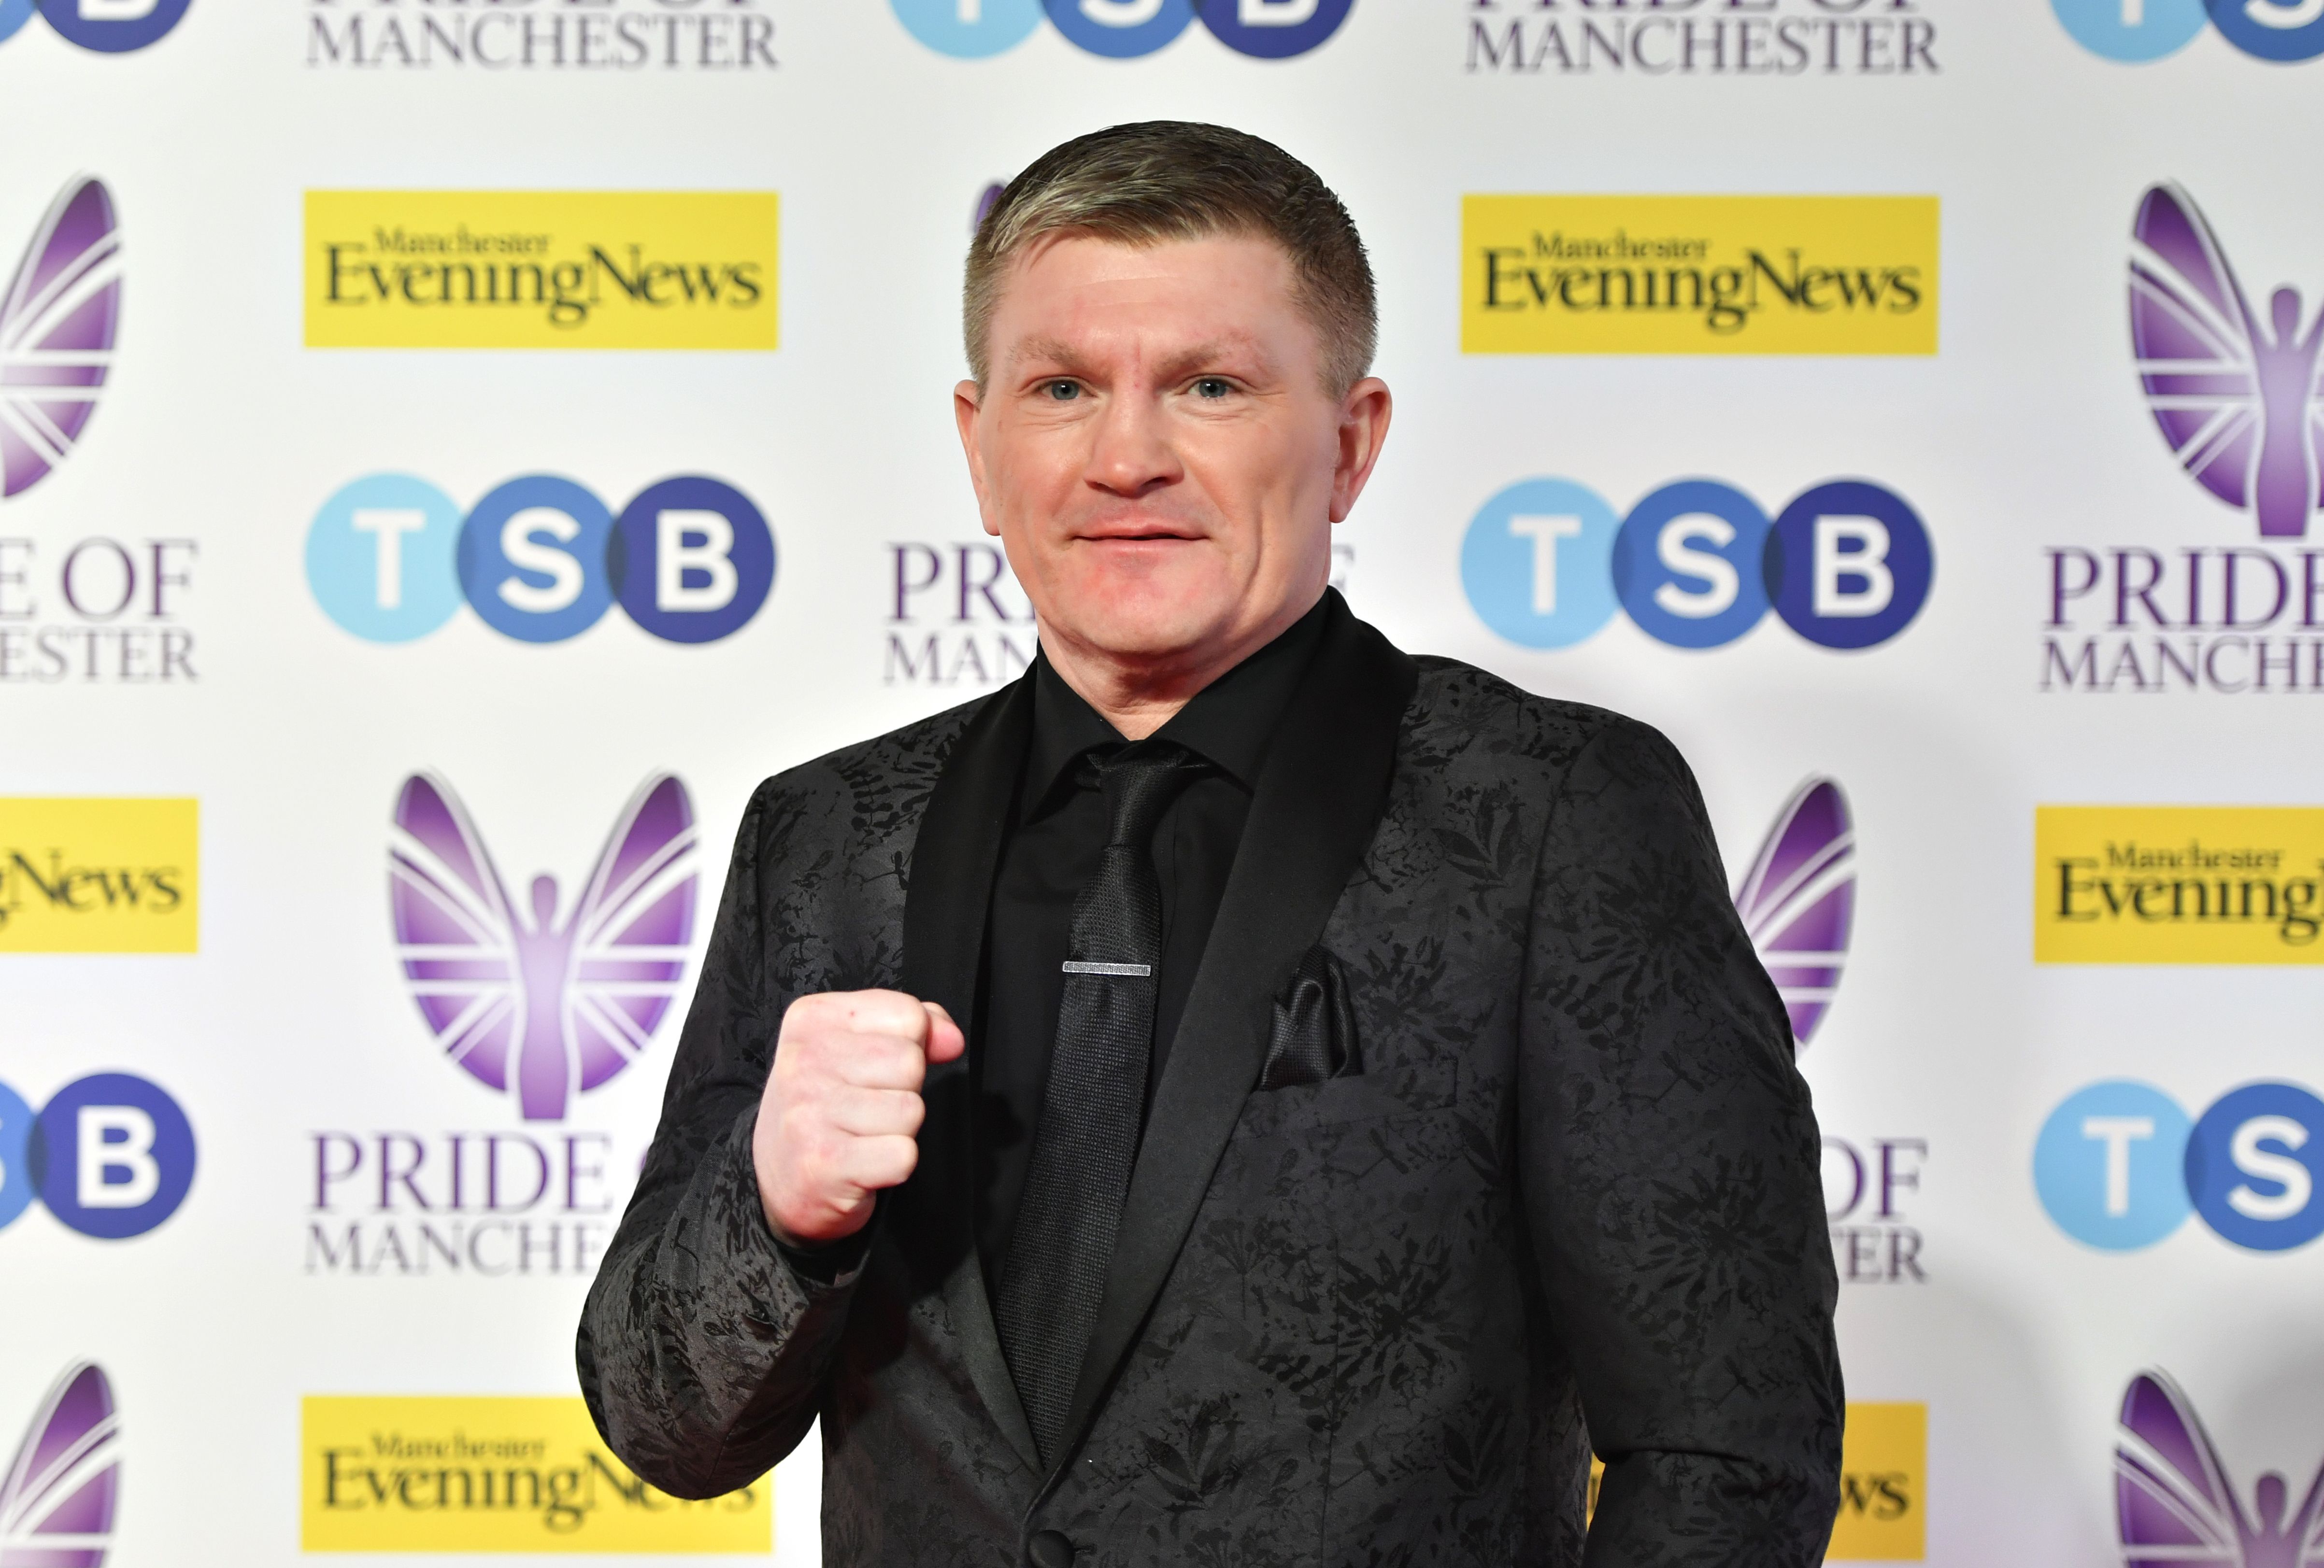 Ricky Hatton poses for a photo at an event